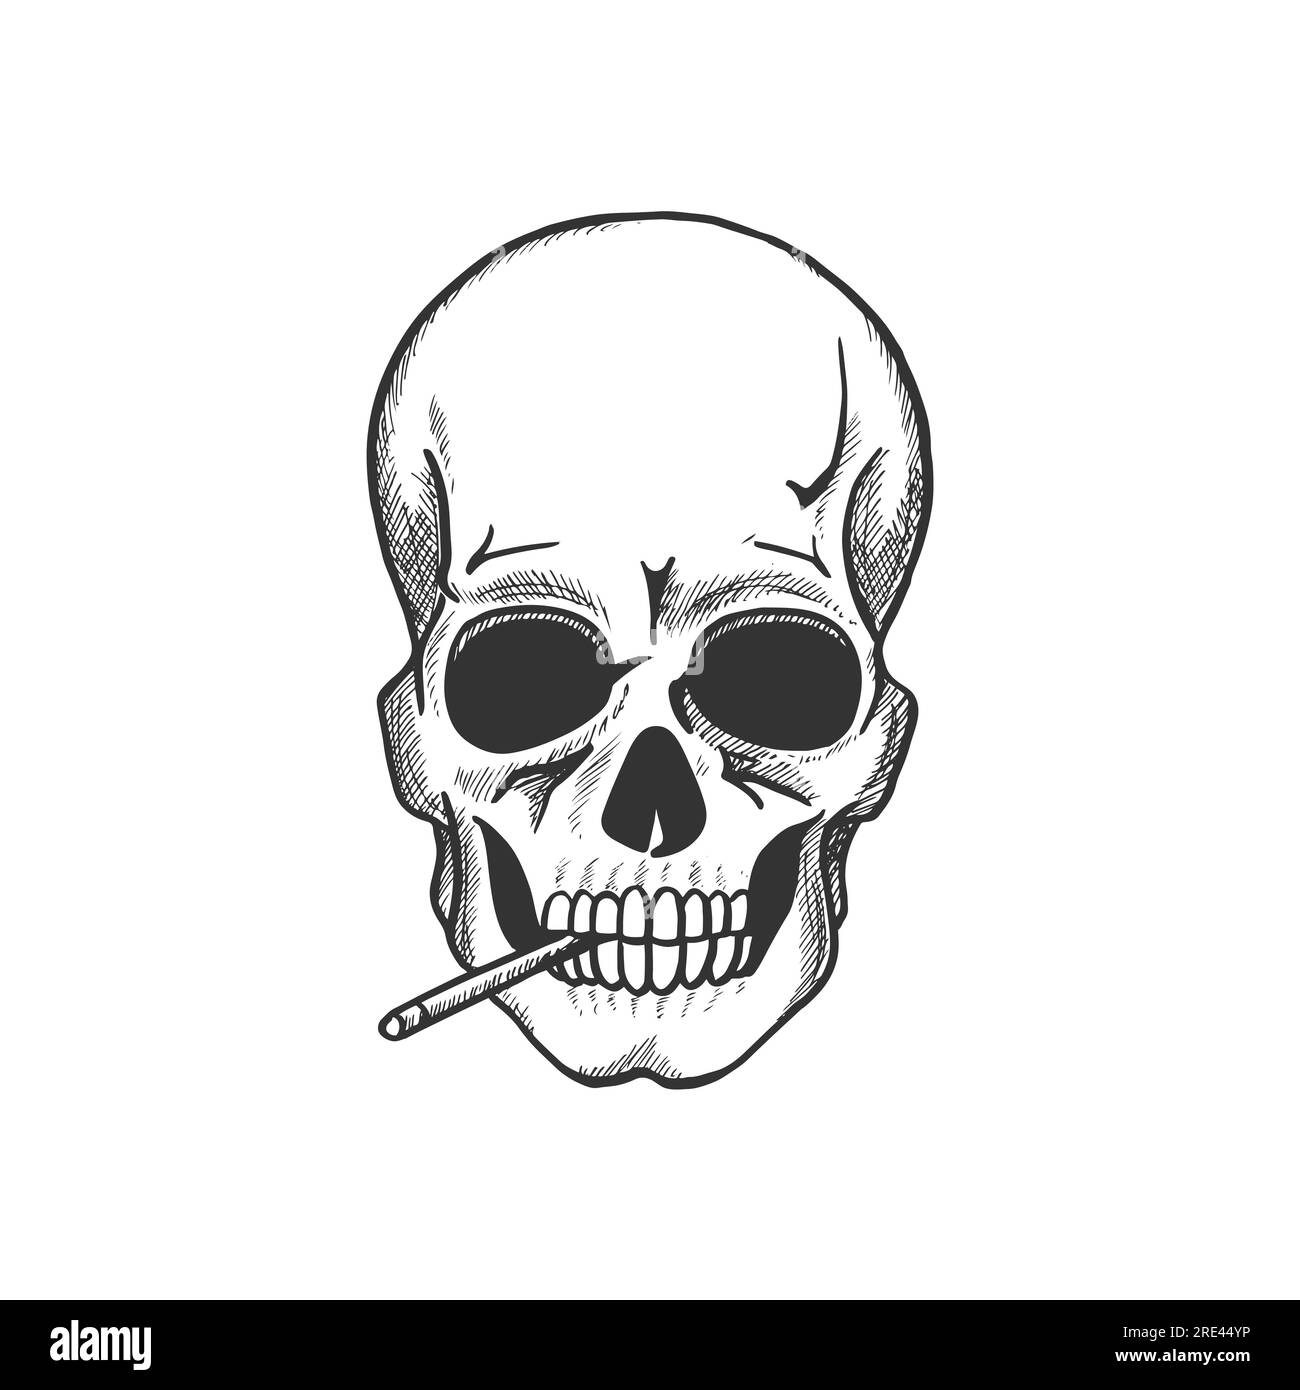 skull smoking sketch for death danger symbol and tobacco addiction themes design head bone of human skeleton with cigarette for warning sign or tattoo design 2RE44YP